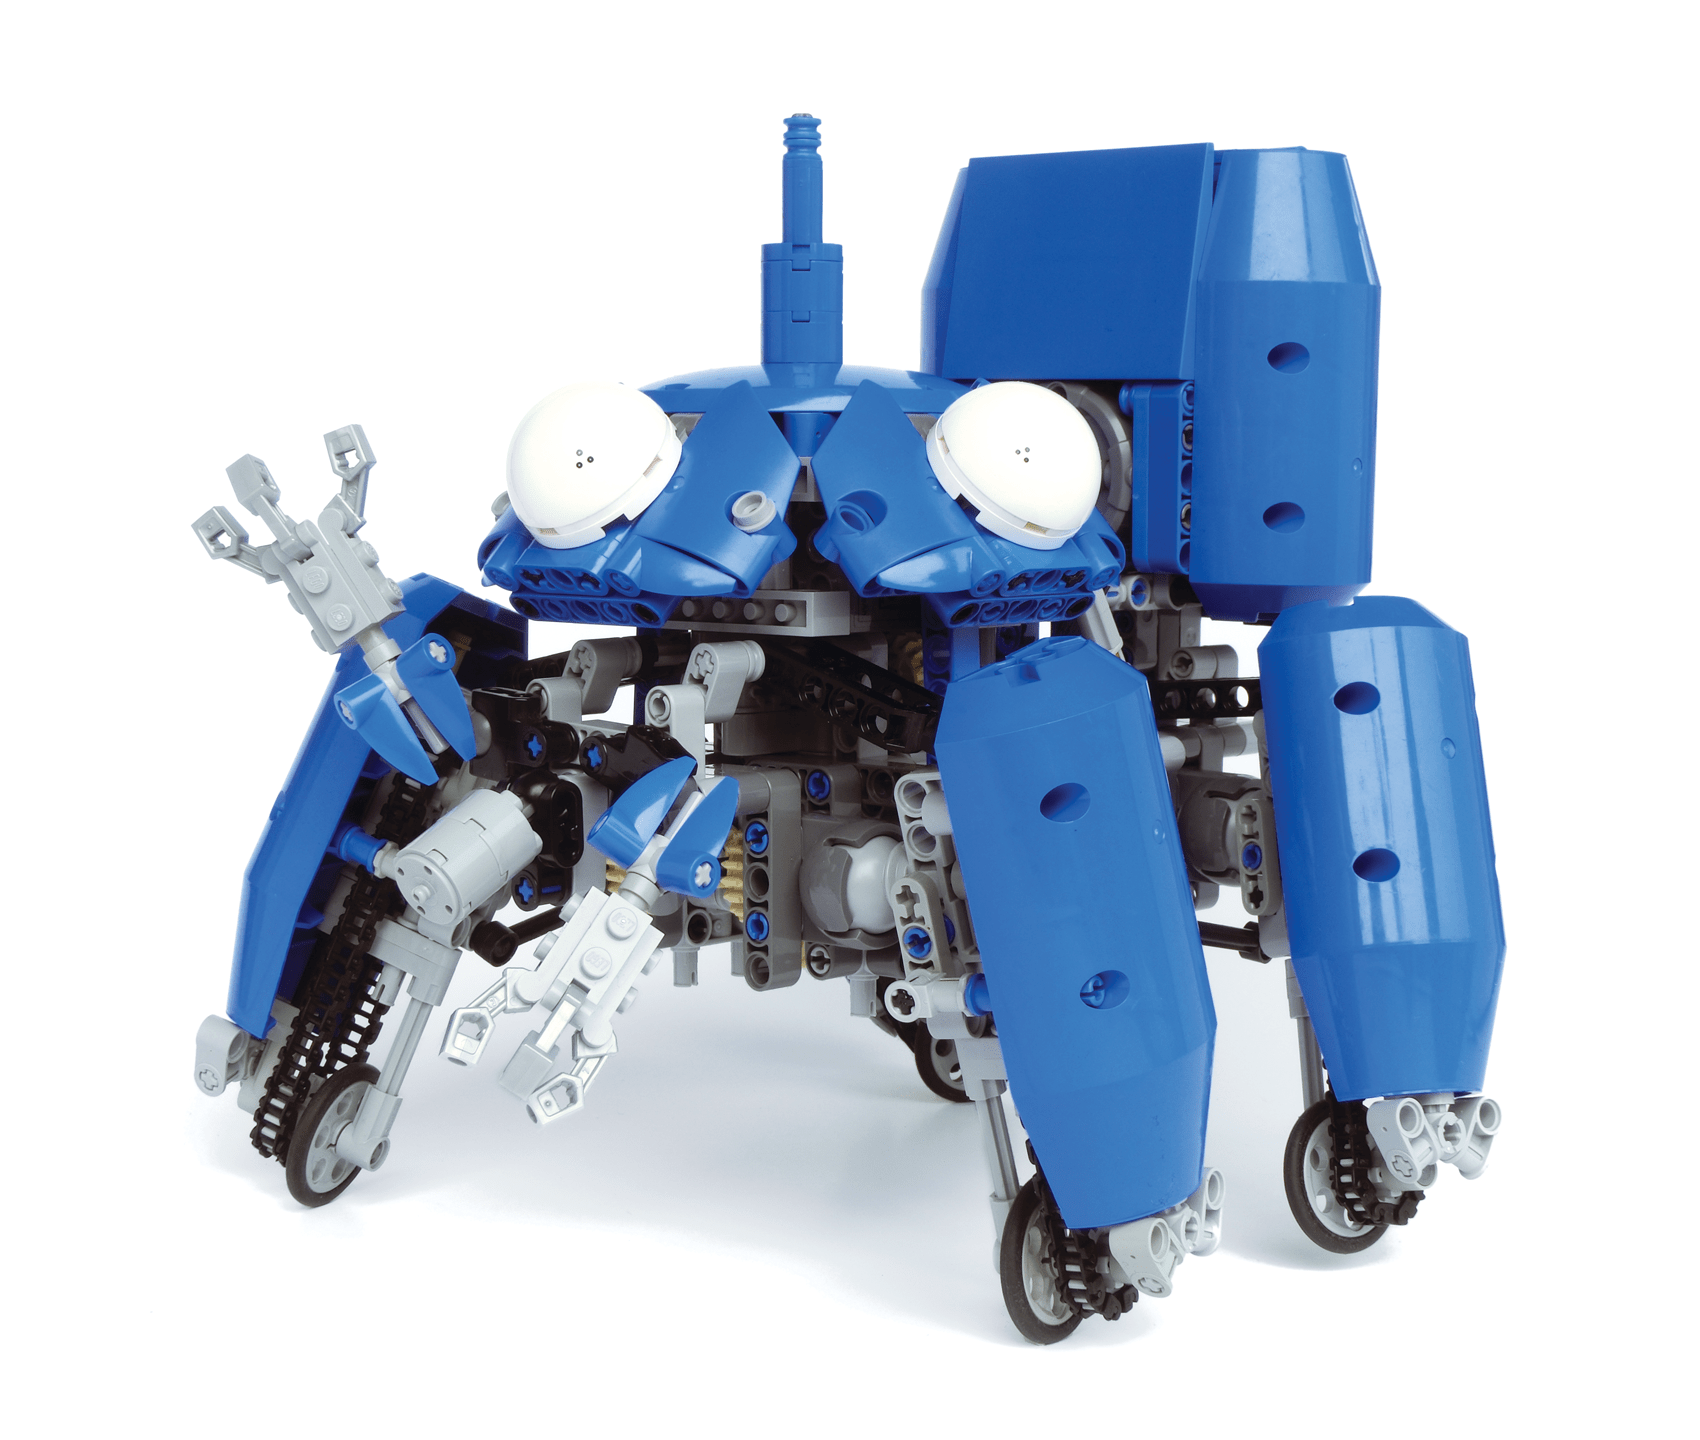 Some Of The Best LEGO Uses More Than Just Bricks